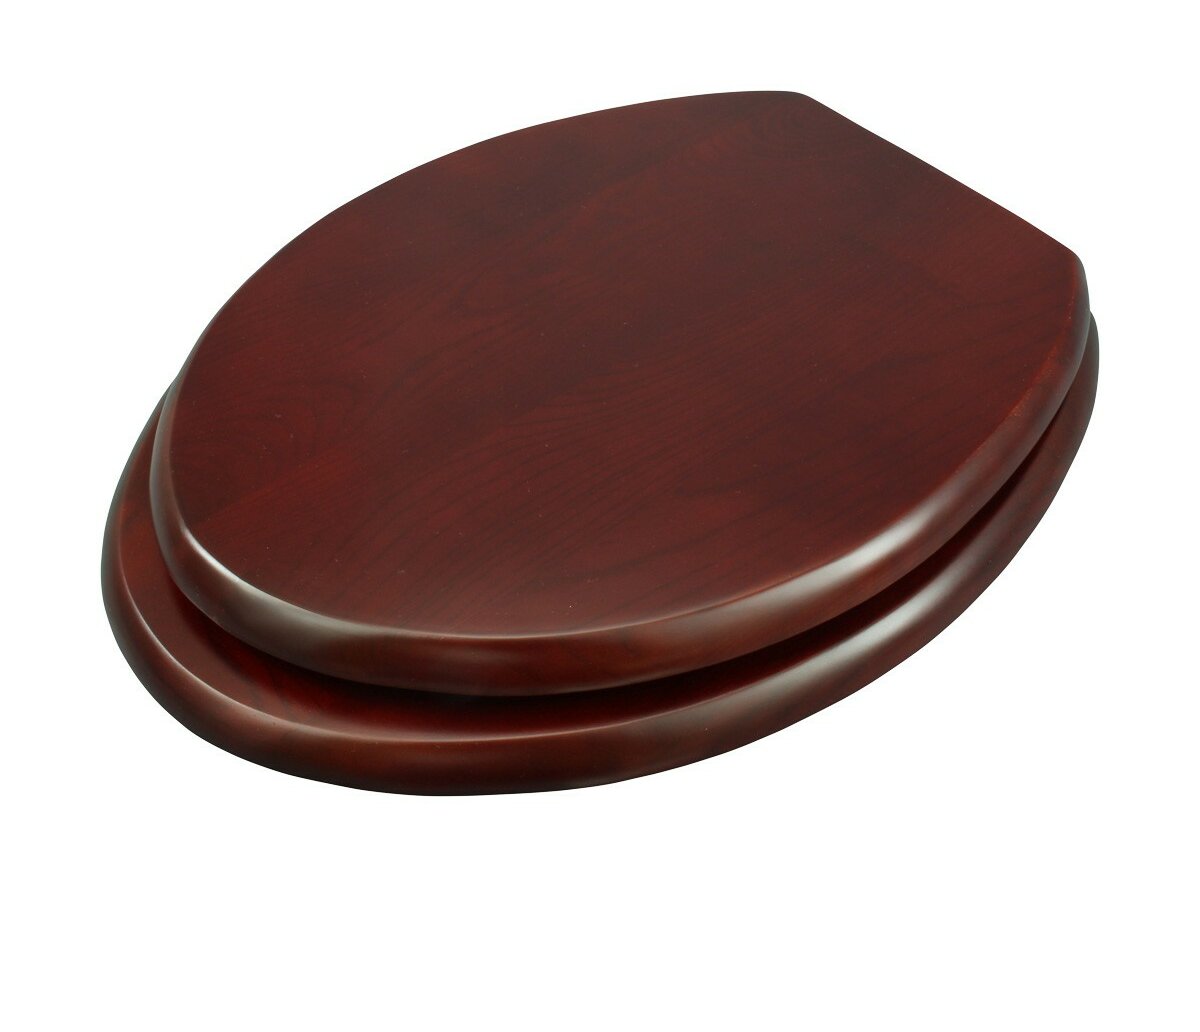 Details about   AIDA 19” Economy Elongated Wood Toilet Seat solid wood toilet seat US Stock 